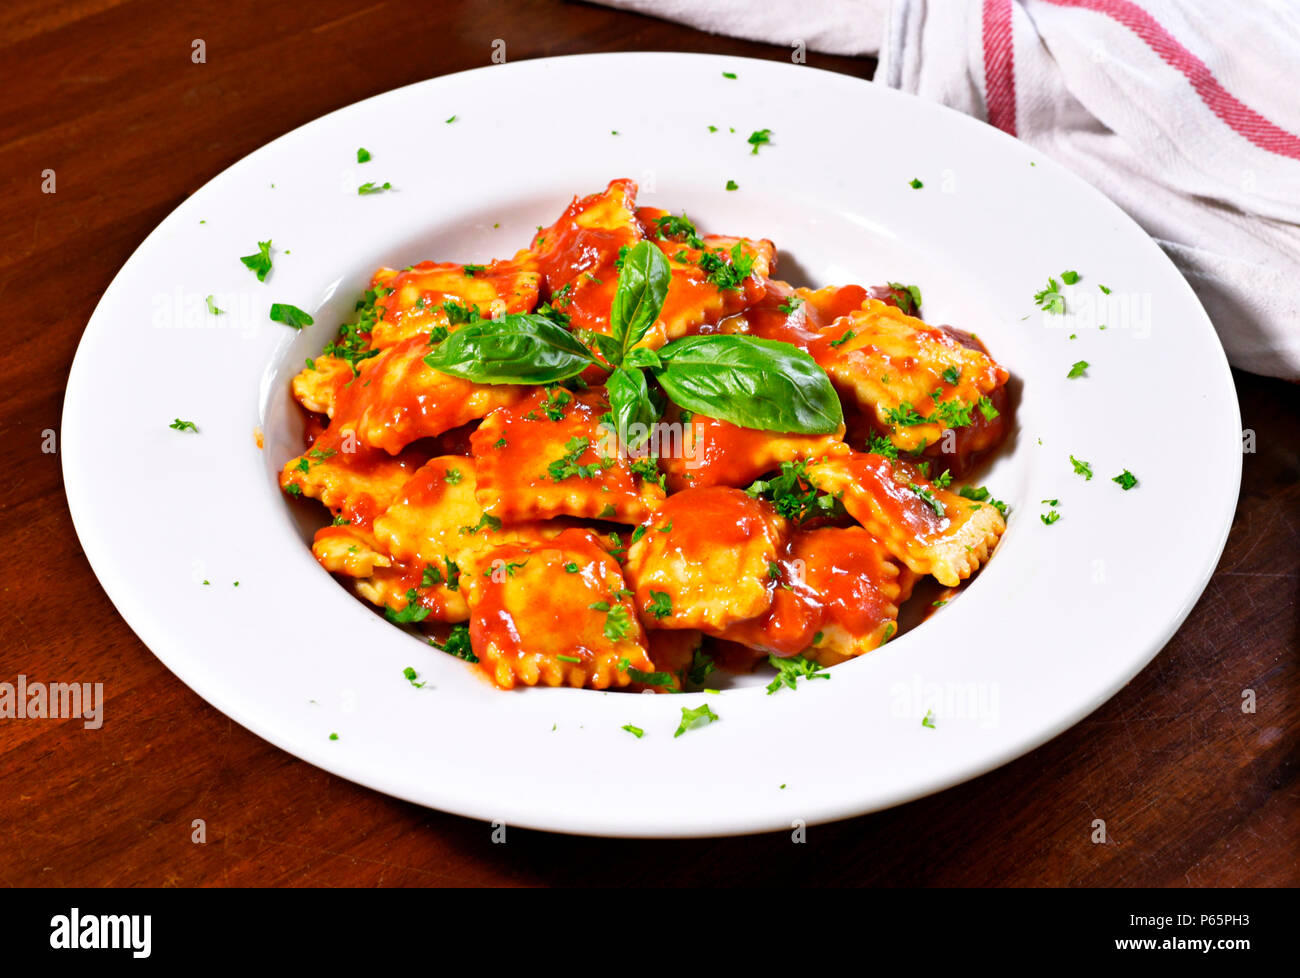 Fresh ravioli pasta with basil leaf and tomato sauce on a white plate. Stock Photo